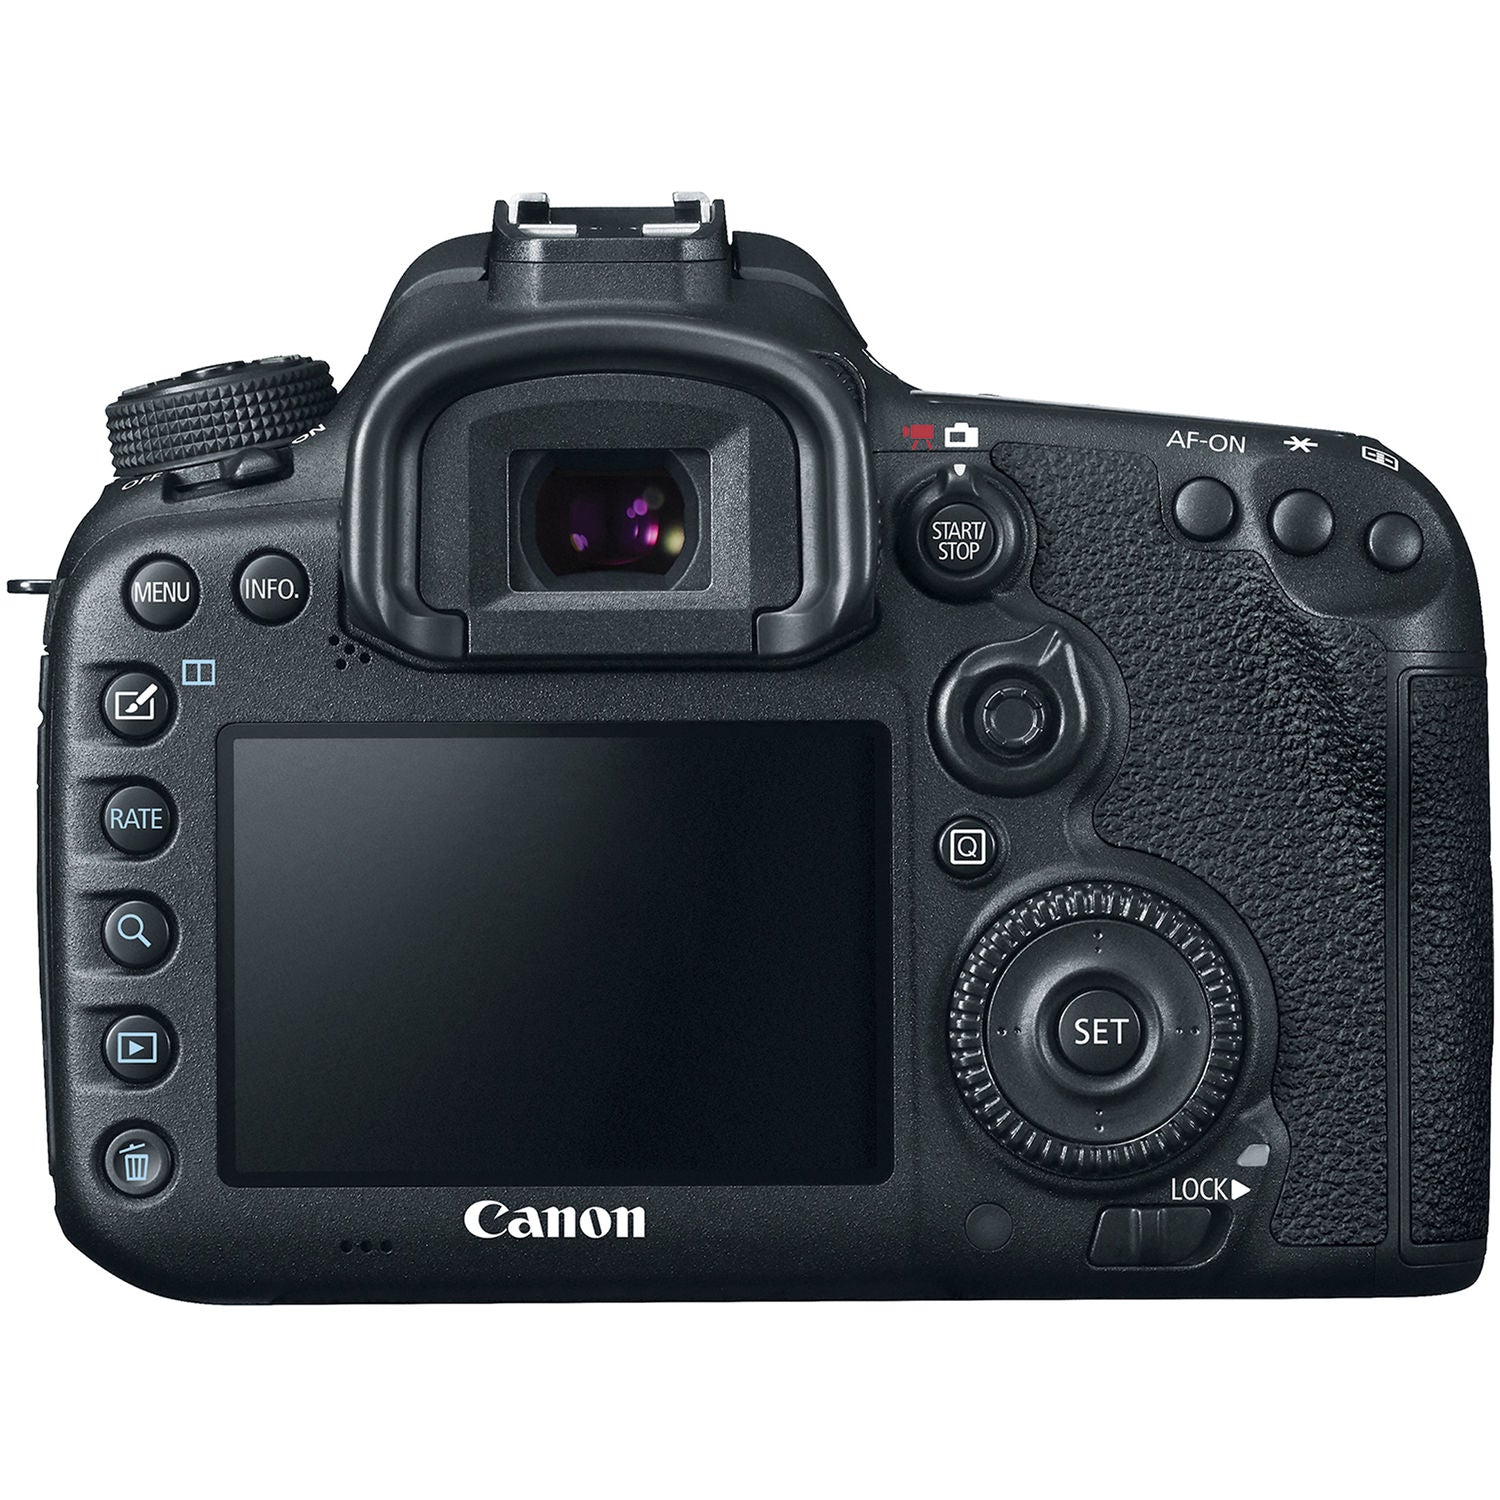 Canon EOS 7D Mark II DSLR Camera (Intl Model) with 18-135mm Lens & W-E1 Wi-Fi Adapter With Memory Card Kit, Filter Kit